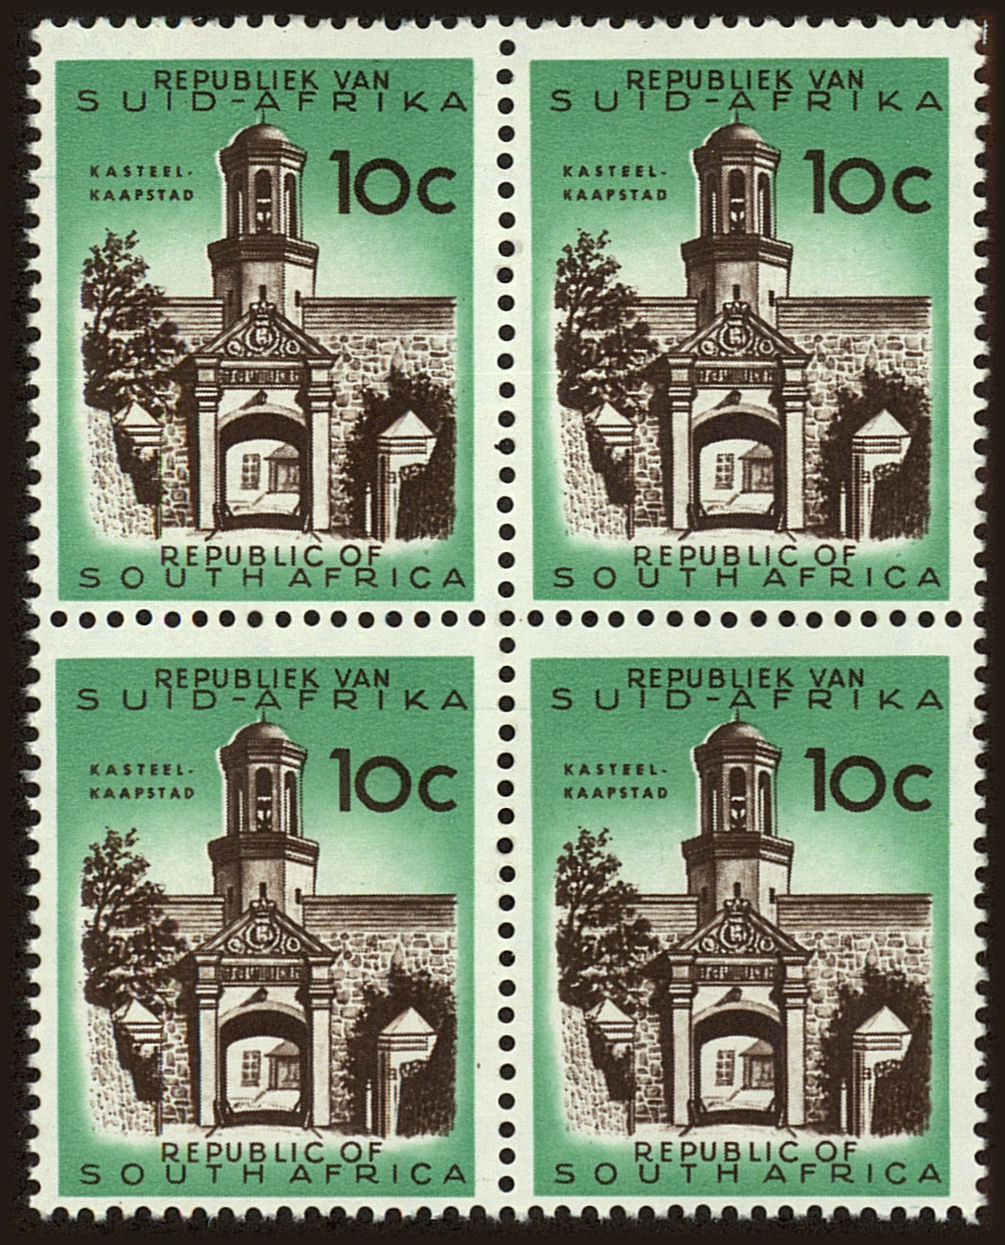 Front view of South Africa 262 collectors stamp